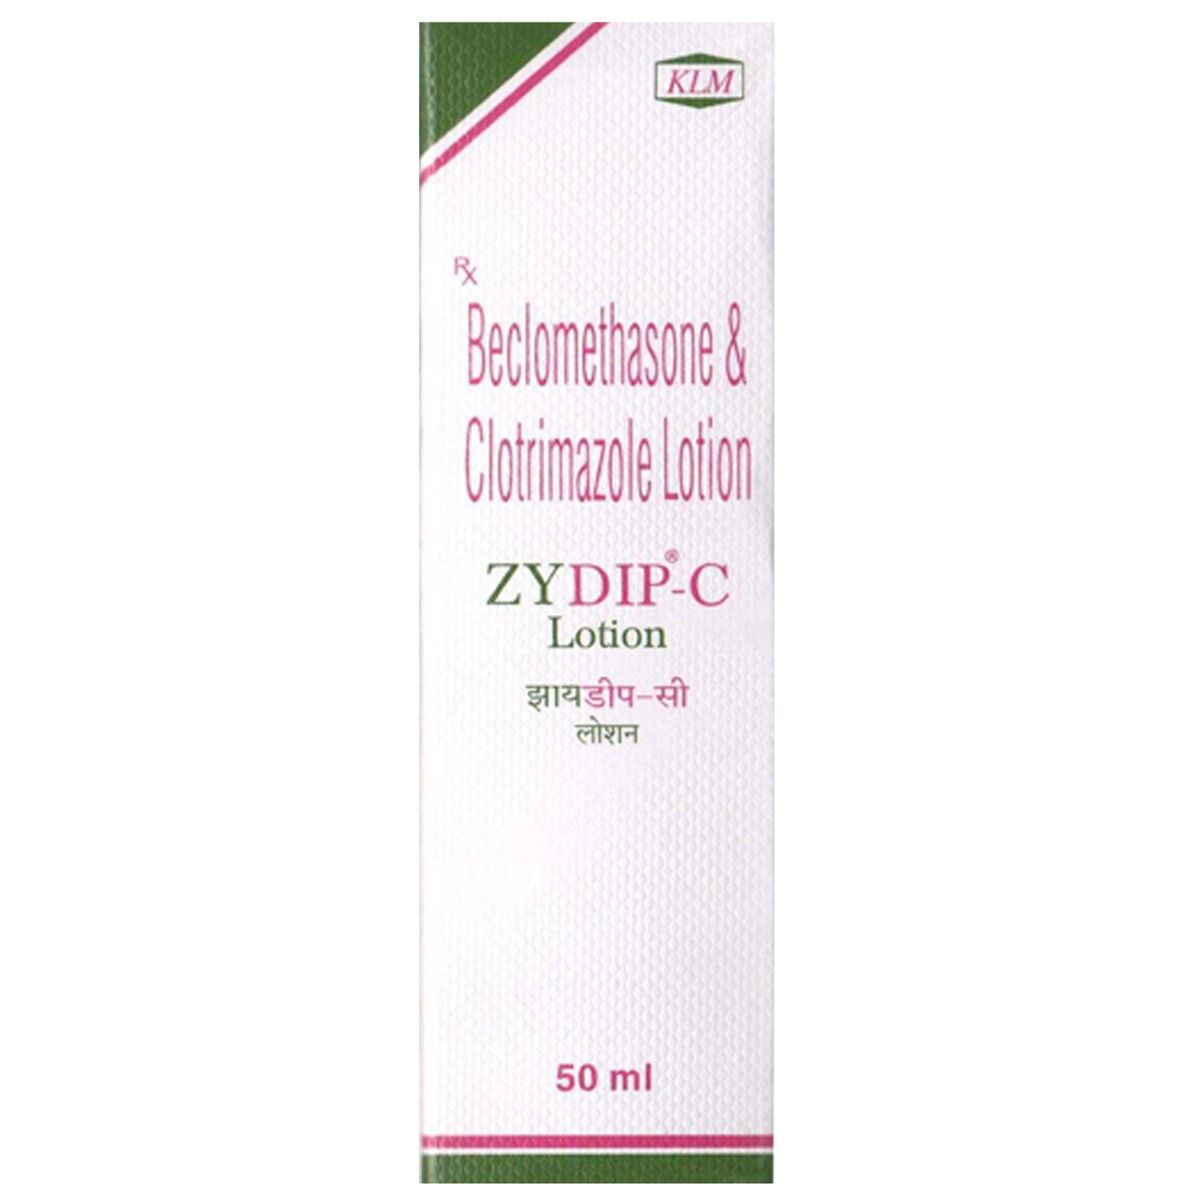 Zydip C Lotion 50 ml Price, Uses, Side Effects, Composition - Apollo  Pharmacy